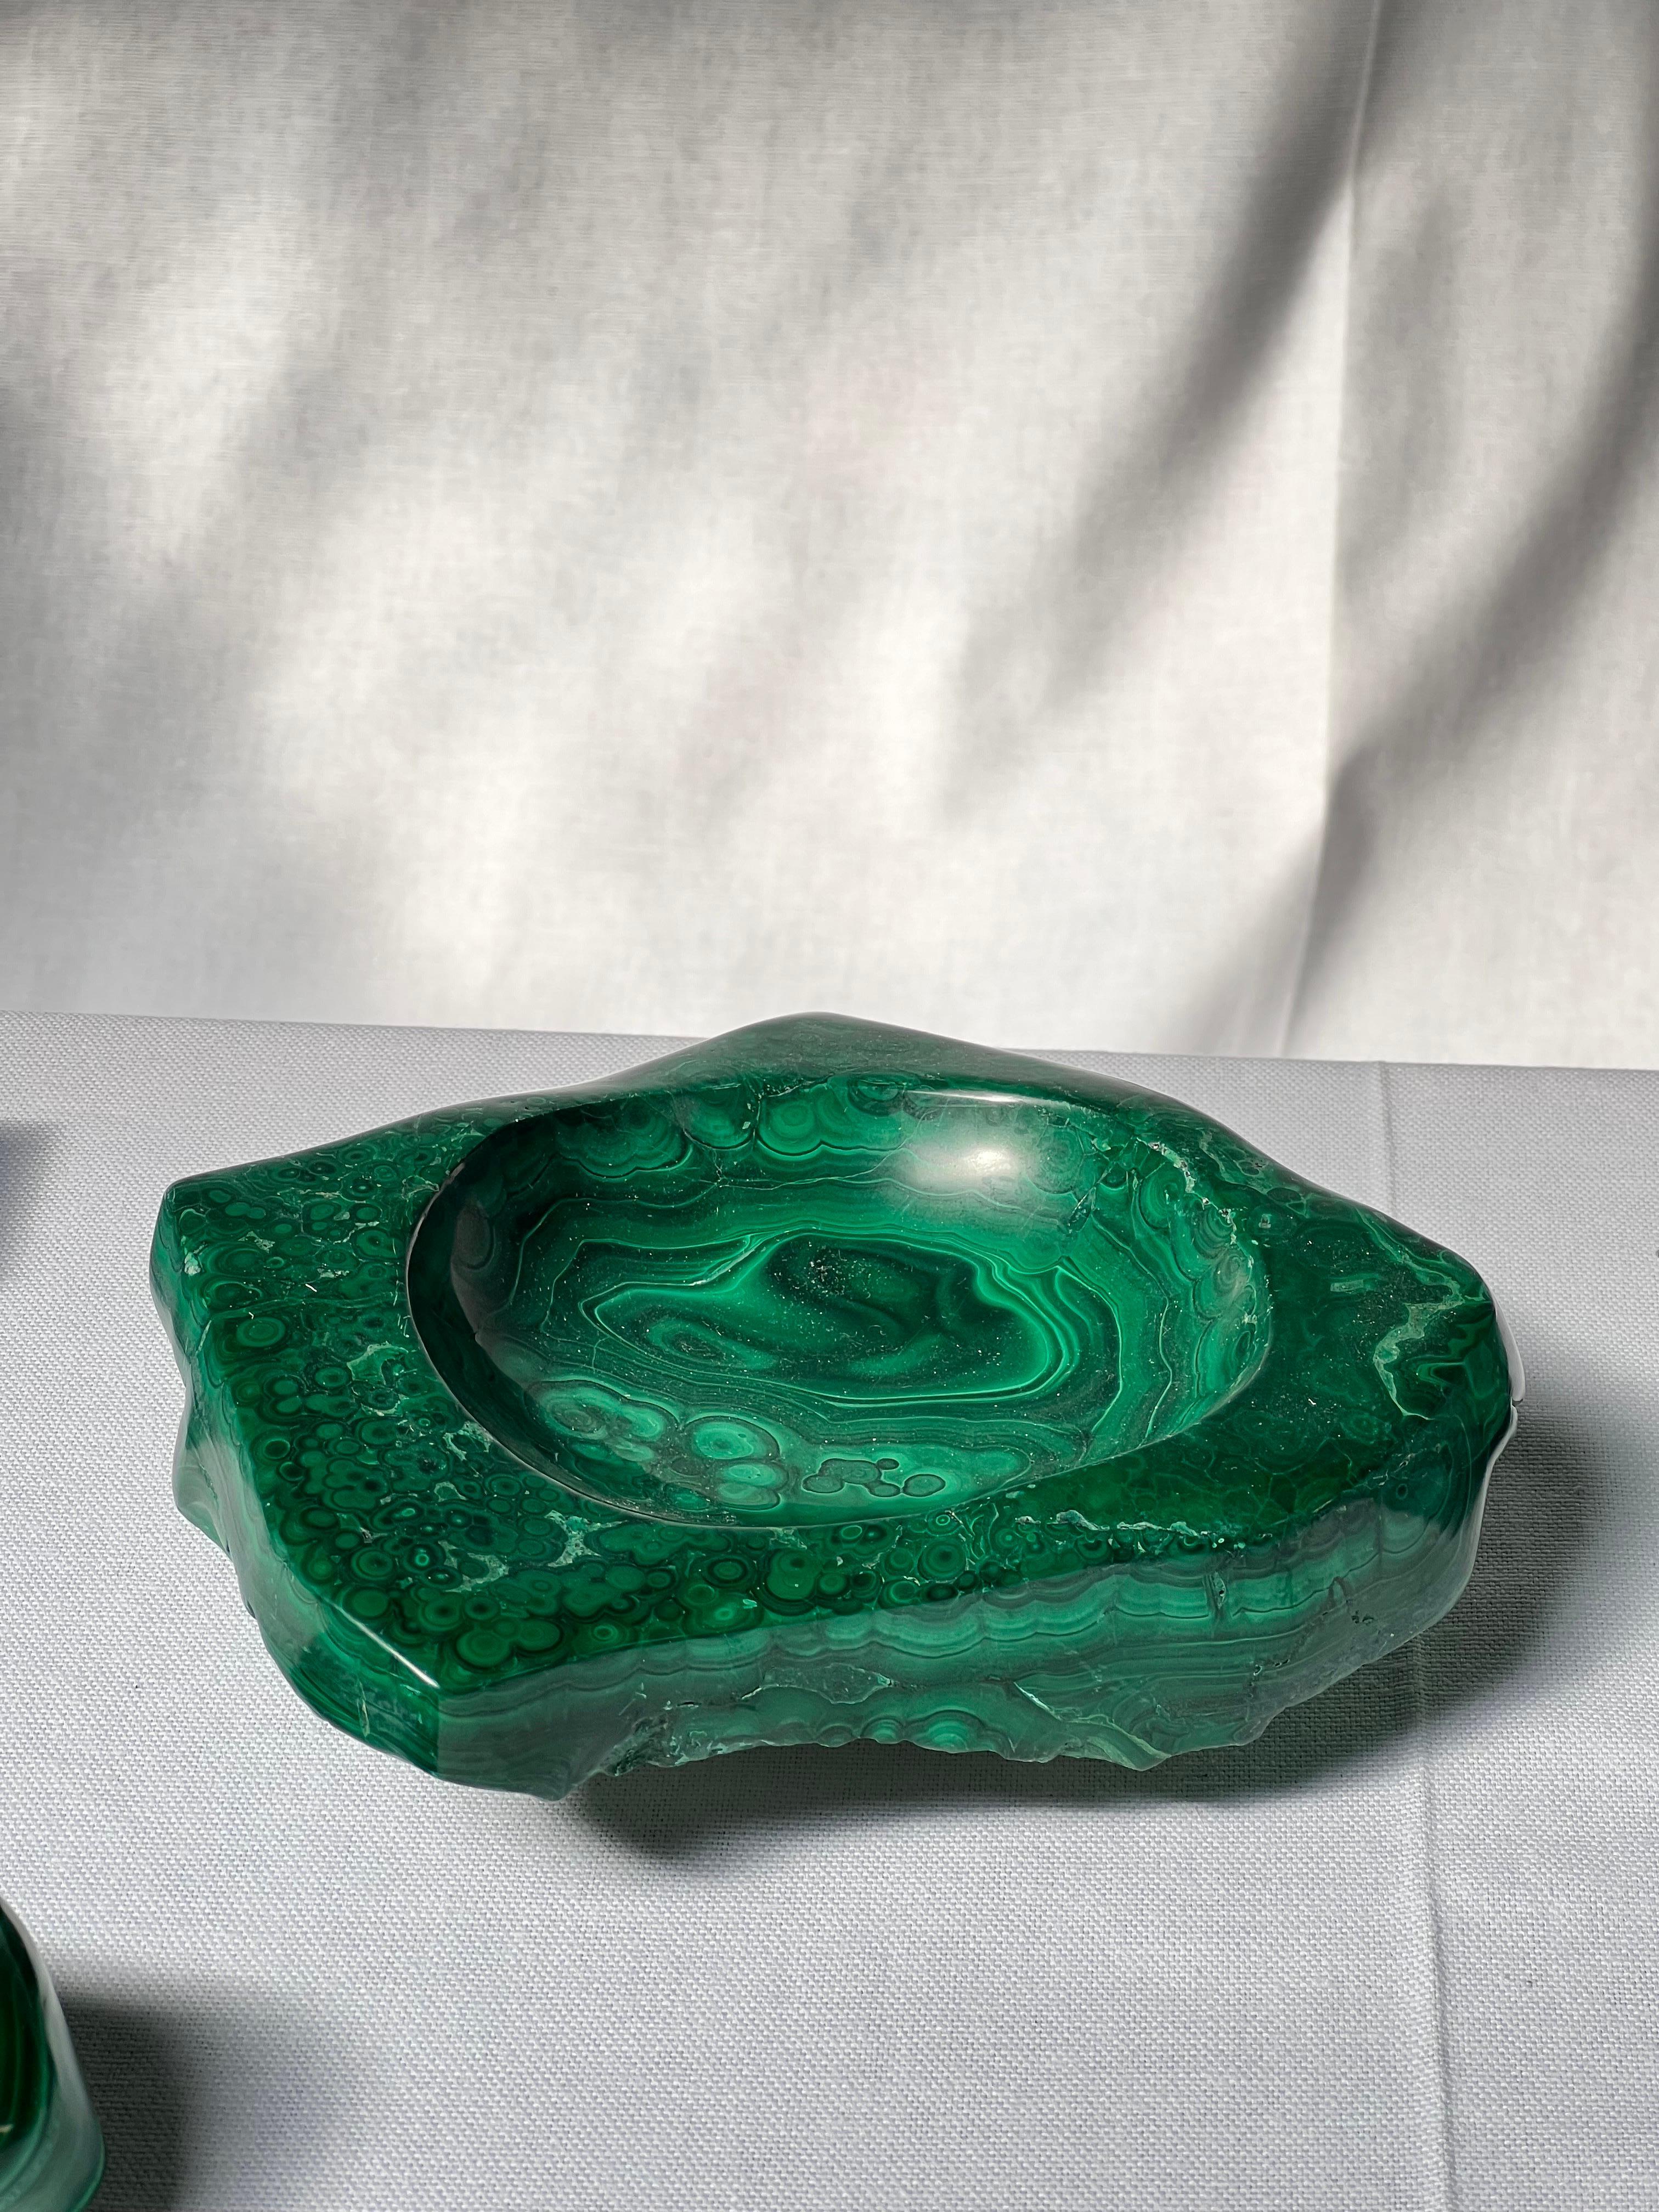 Unique massive malachite from copper mines in old began Congo. Natural stone. Perfect as decorative object or for cigars and cigarettes. It is a mix between brutalist and polished